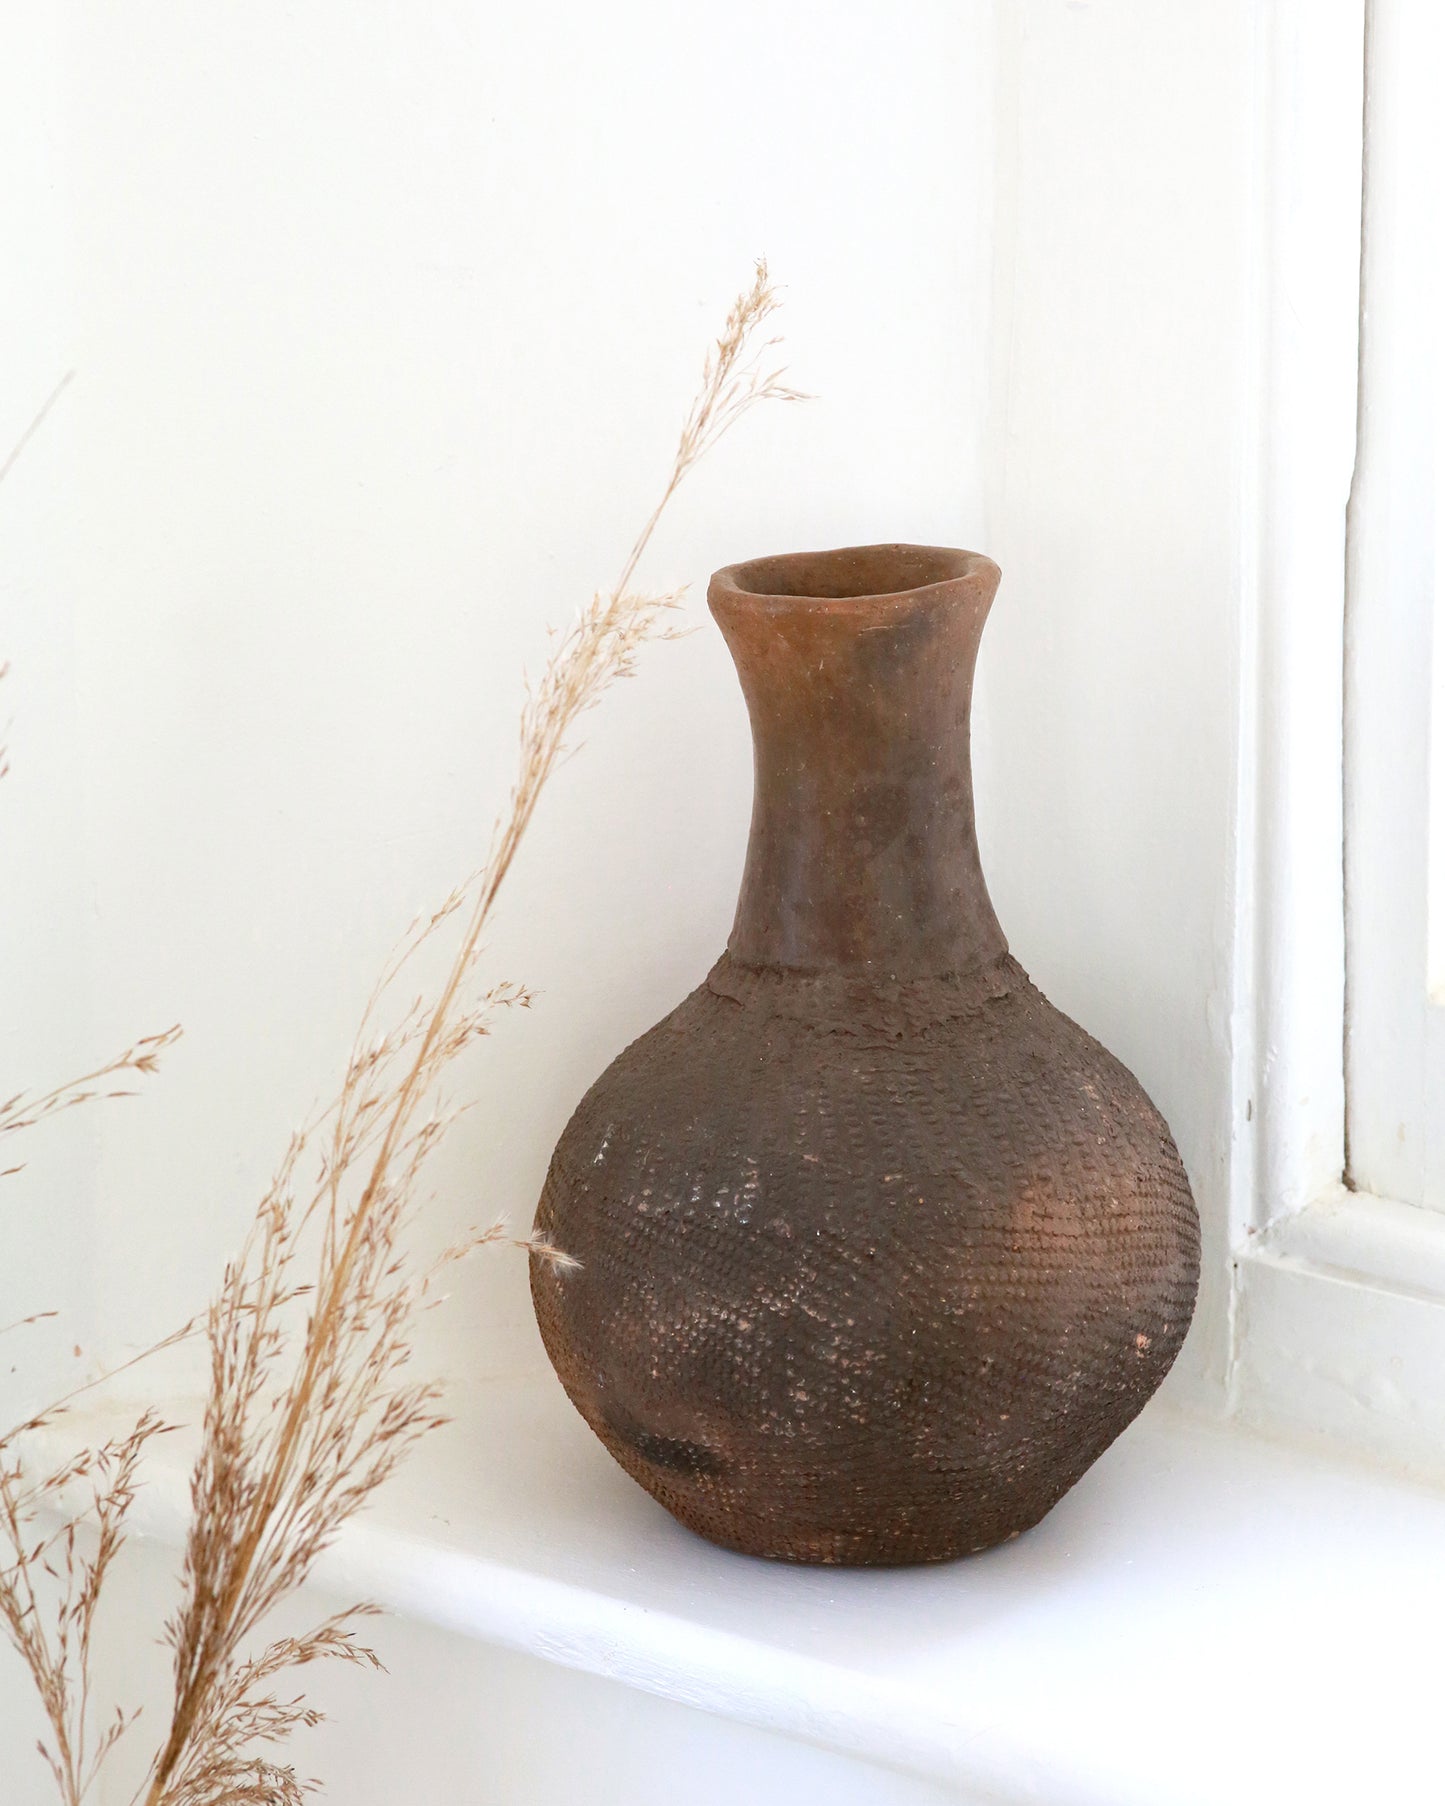 Antique African textured vase on window sill with natural stems